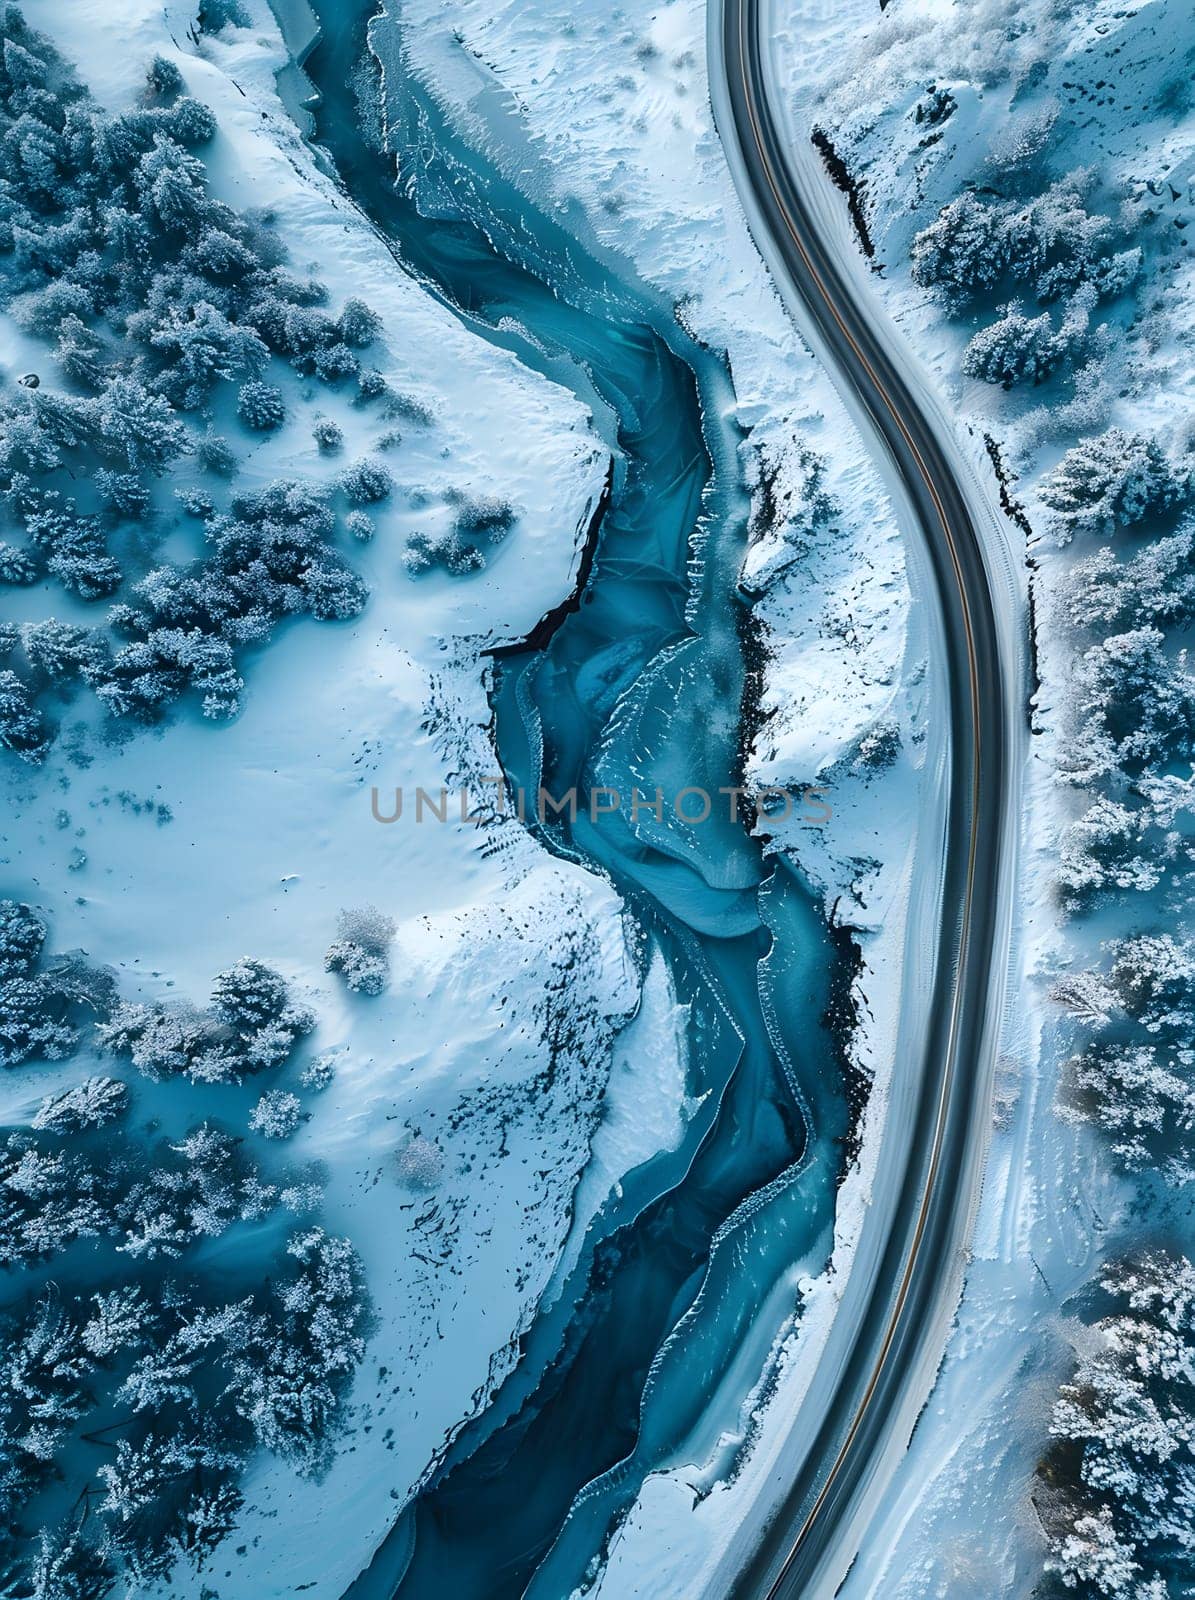 A road winds through a snowy natural landscape from an aerial perspective by Nadtochiy